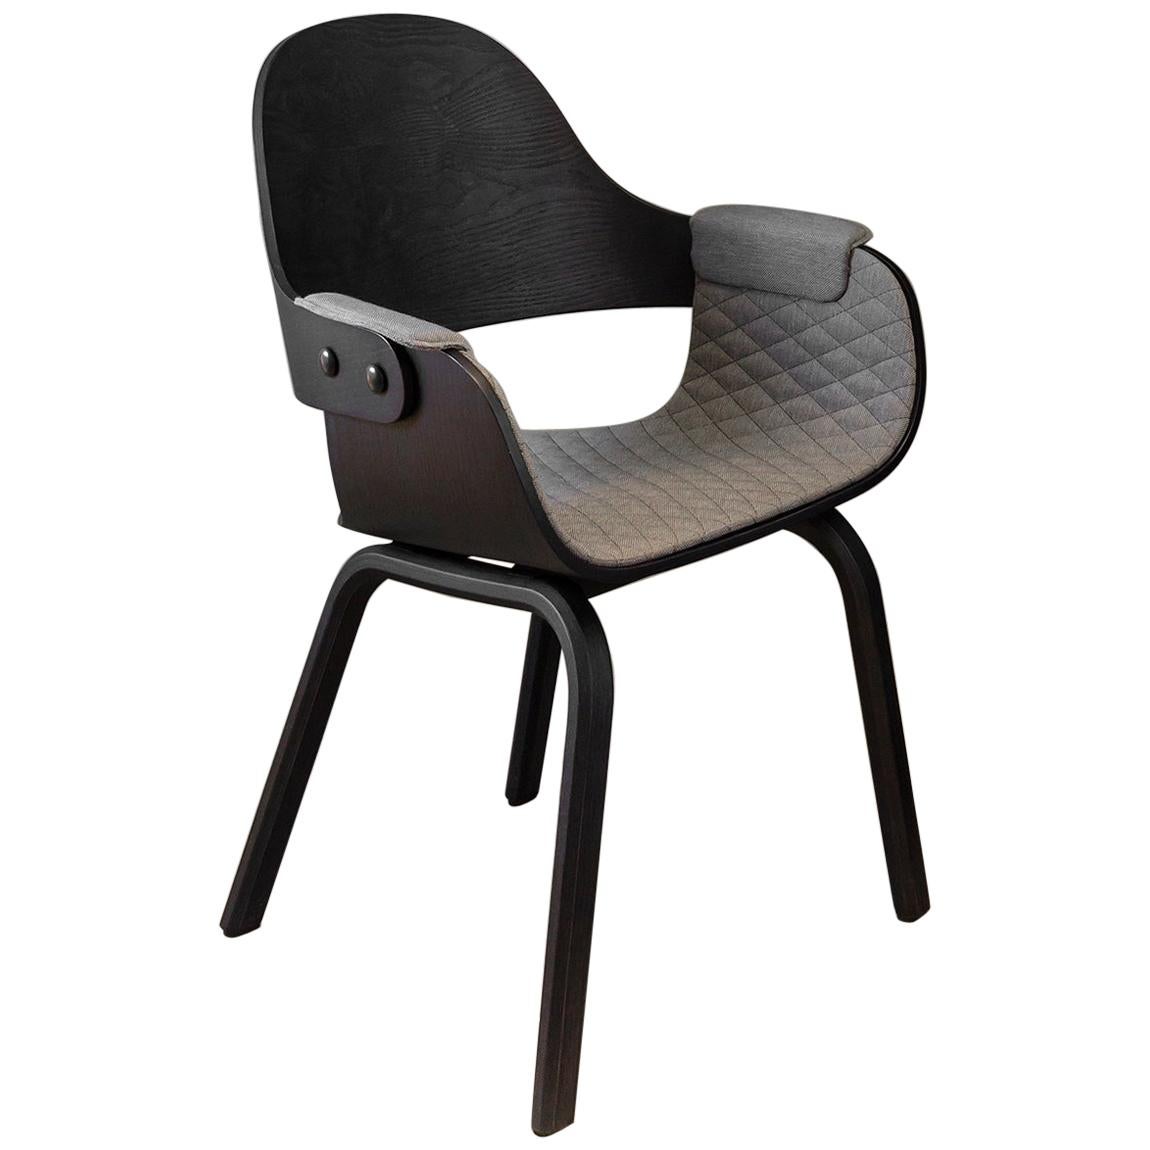 Showtime chair by Jaime Hayon contemporary office or dining chair black stained For Sale